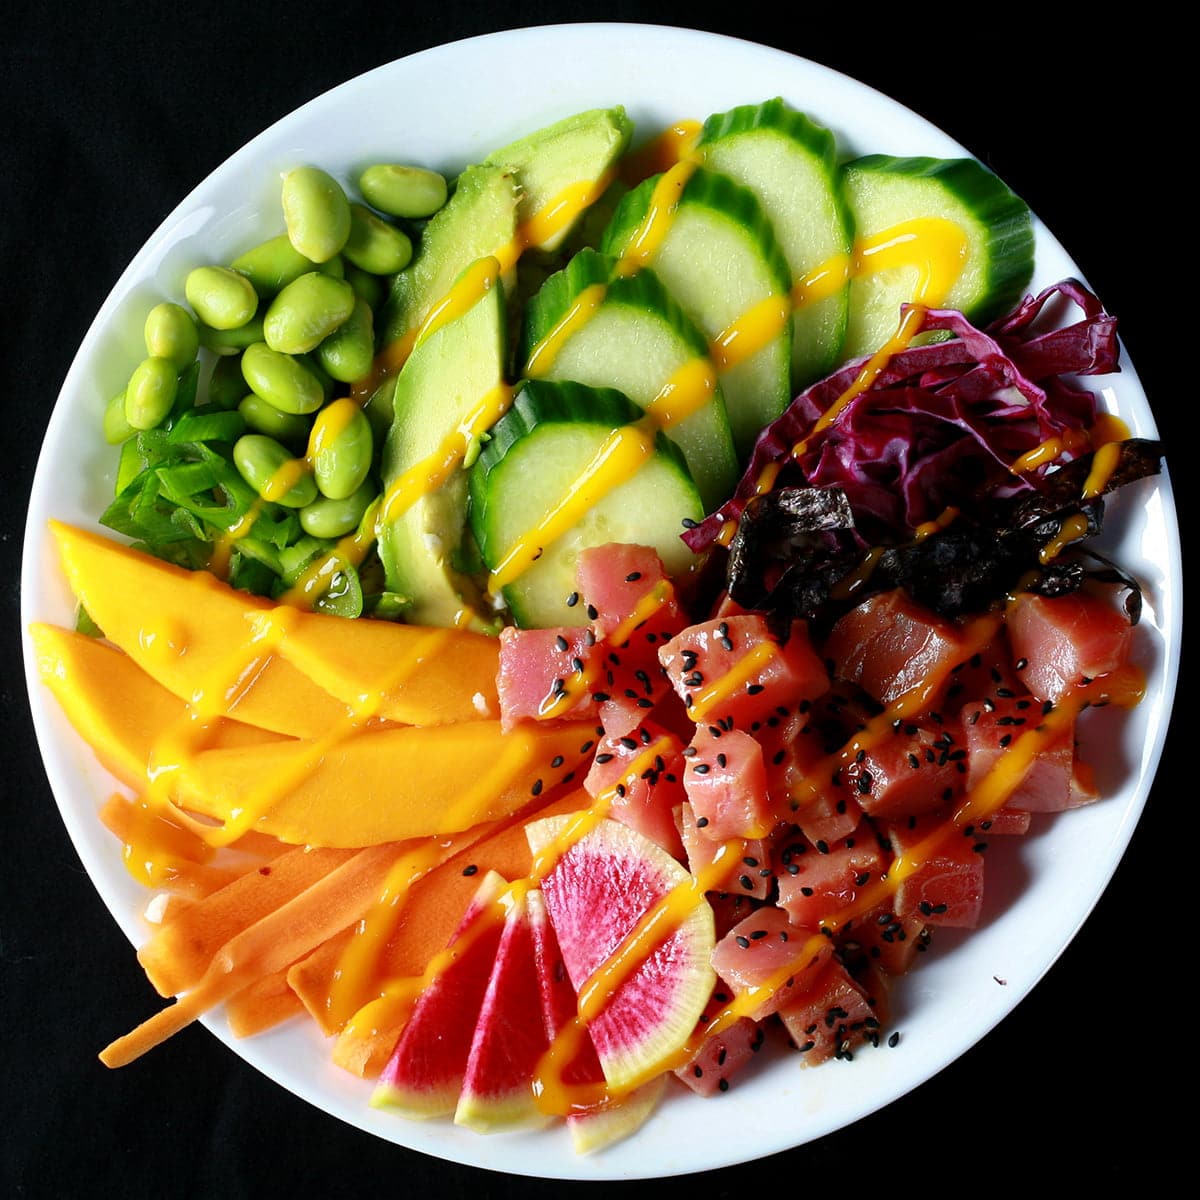 Close up view of a colourful bowl of tuna mango poke. There is a rainbow of vegetables and fruit, including purple cabbage, watermelon radish, carrots, mango, edamame, avocado, and cucumber